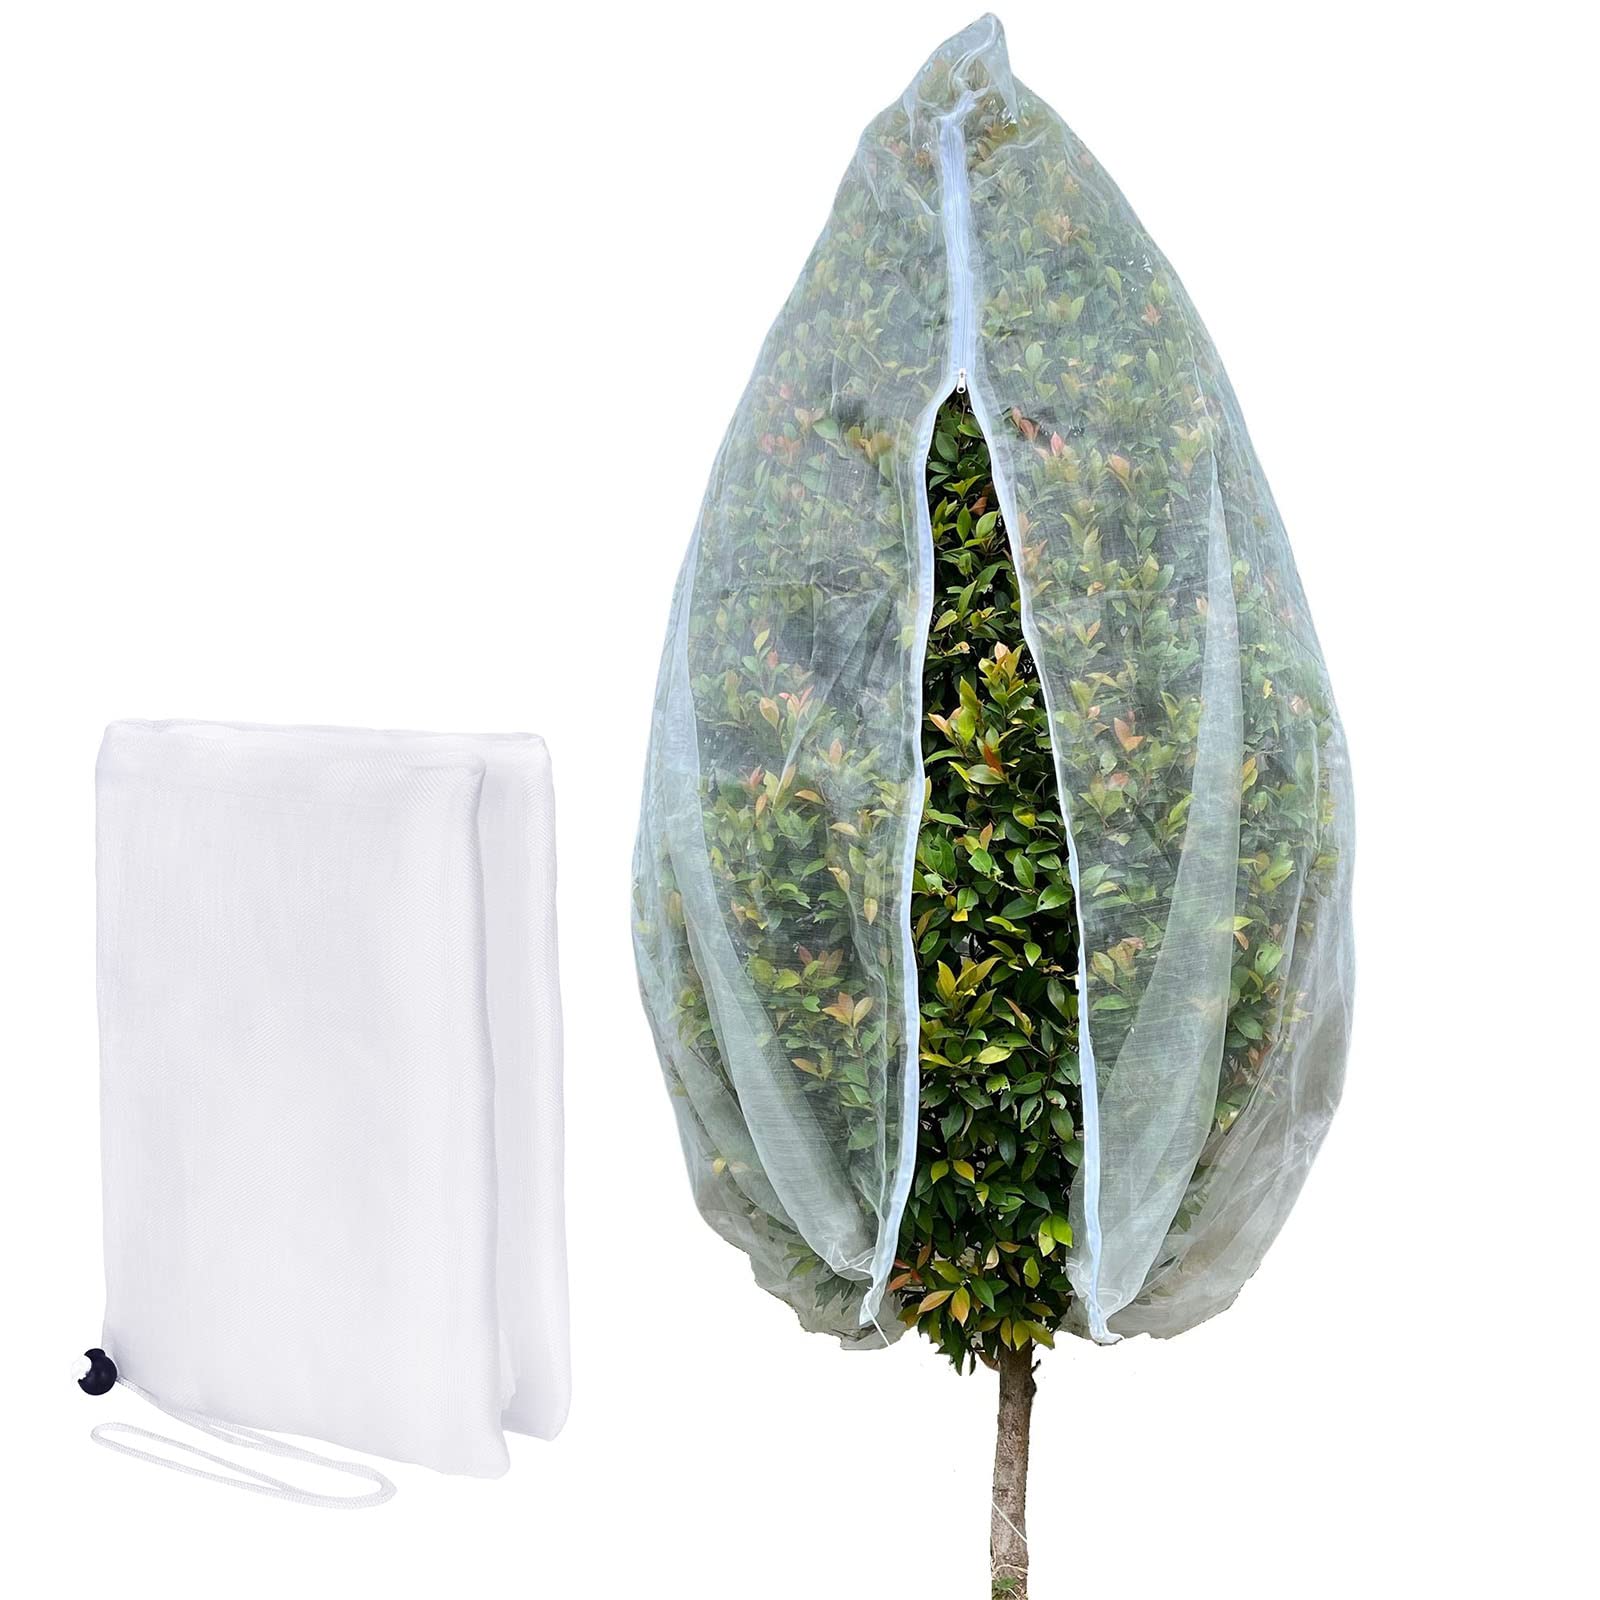 Homoda Fruit Tree Netting Cover with Zipper and Drawstring